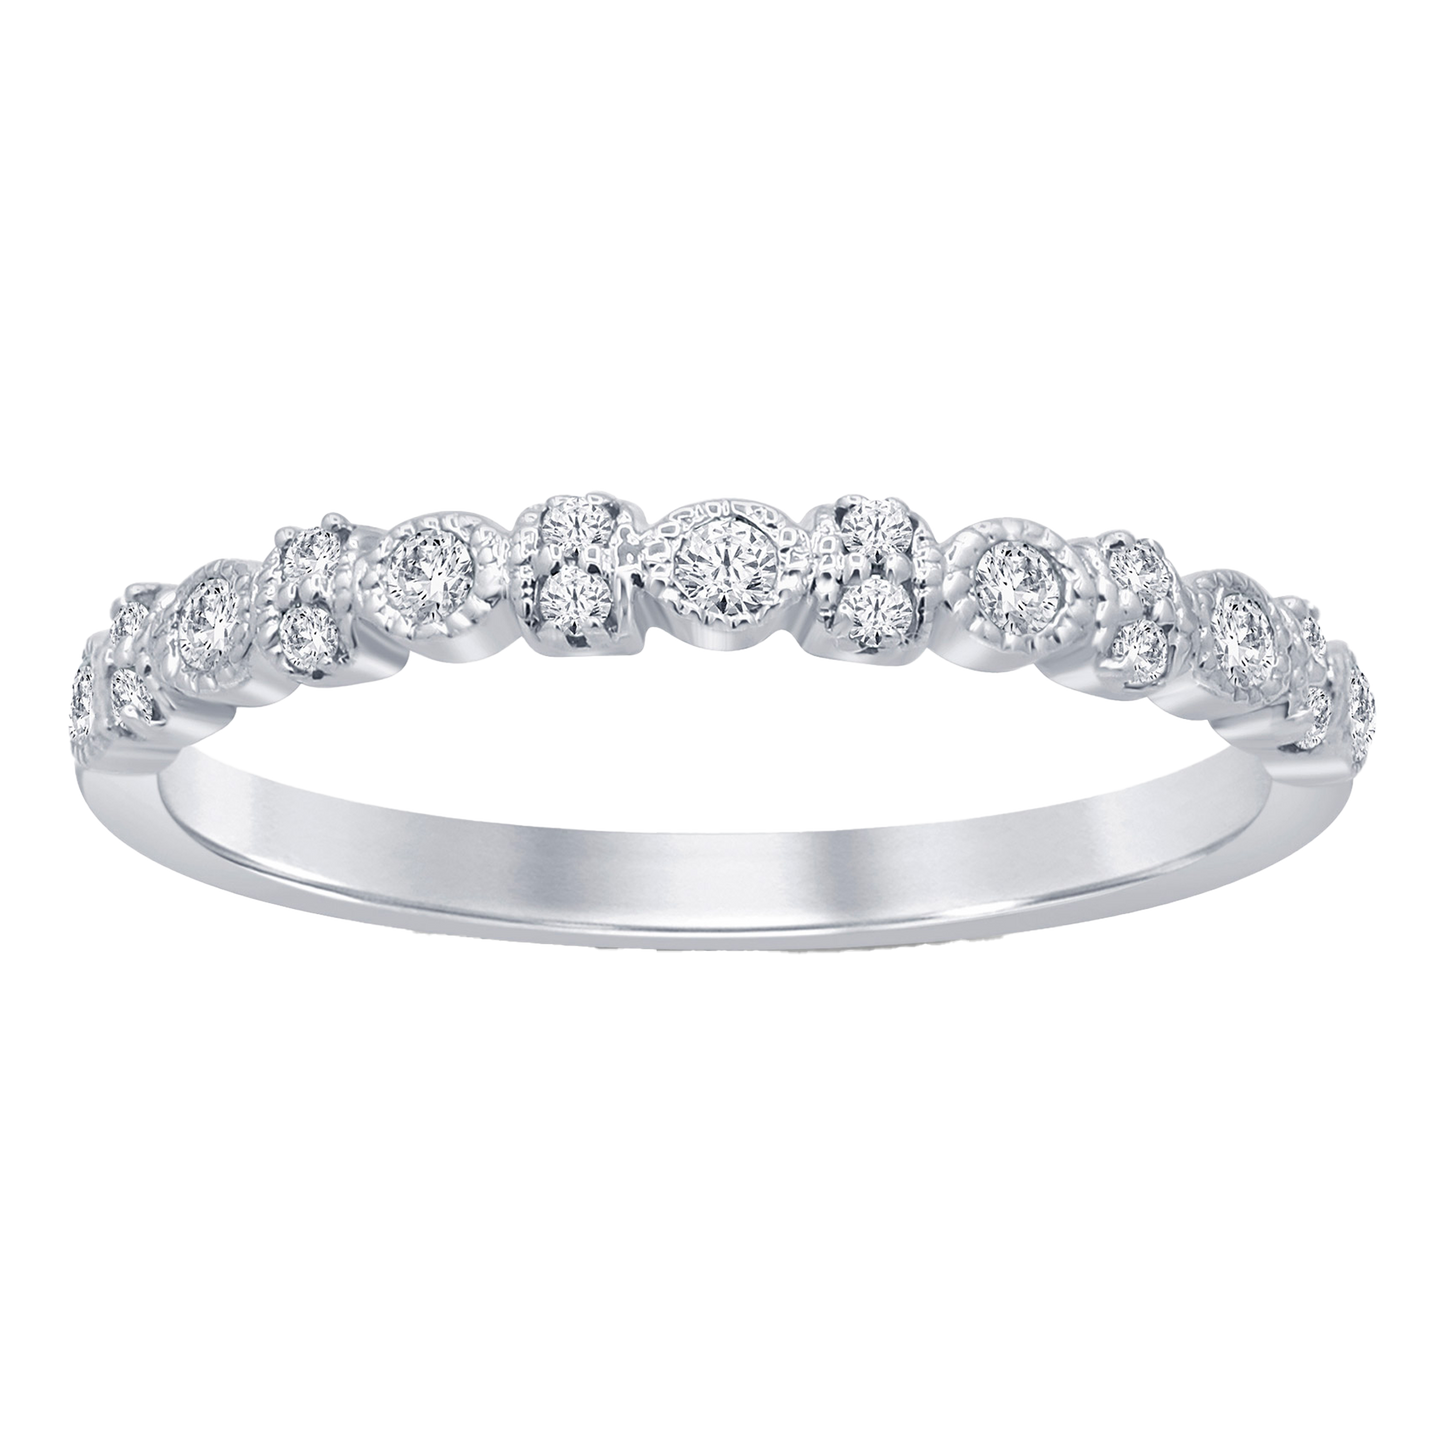 0.17ct Diamond Eternity Wedding Band Ring in 9ct White Gold